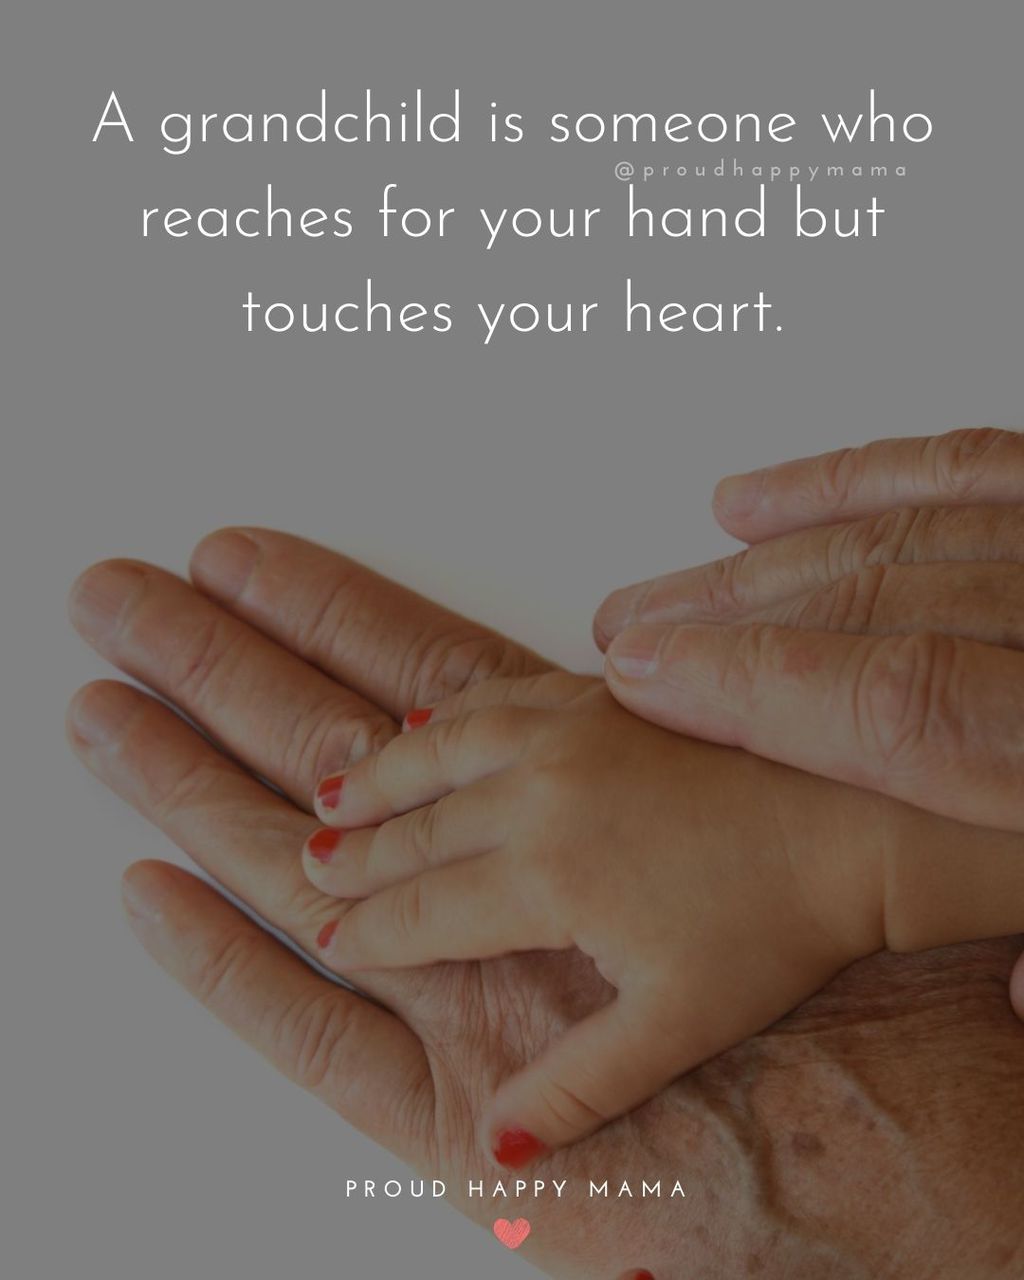 Quotes for Grandchildren - A grandchild is someone who reaches for your hand but touches your heart.